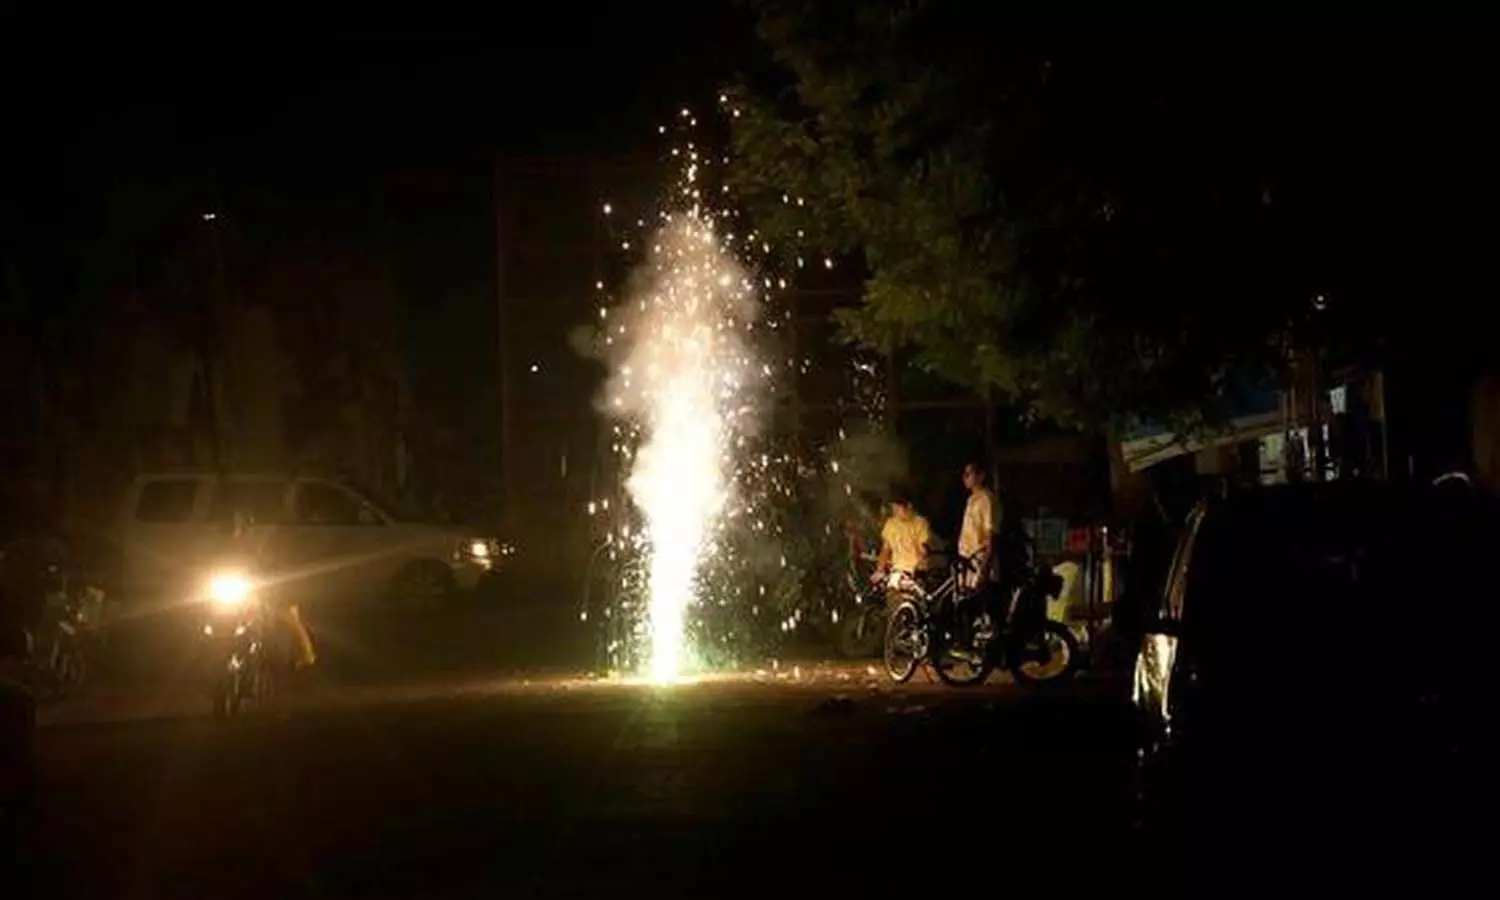 On the occasion of Diwali, arson took place in many places including Delhi, Mumbai